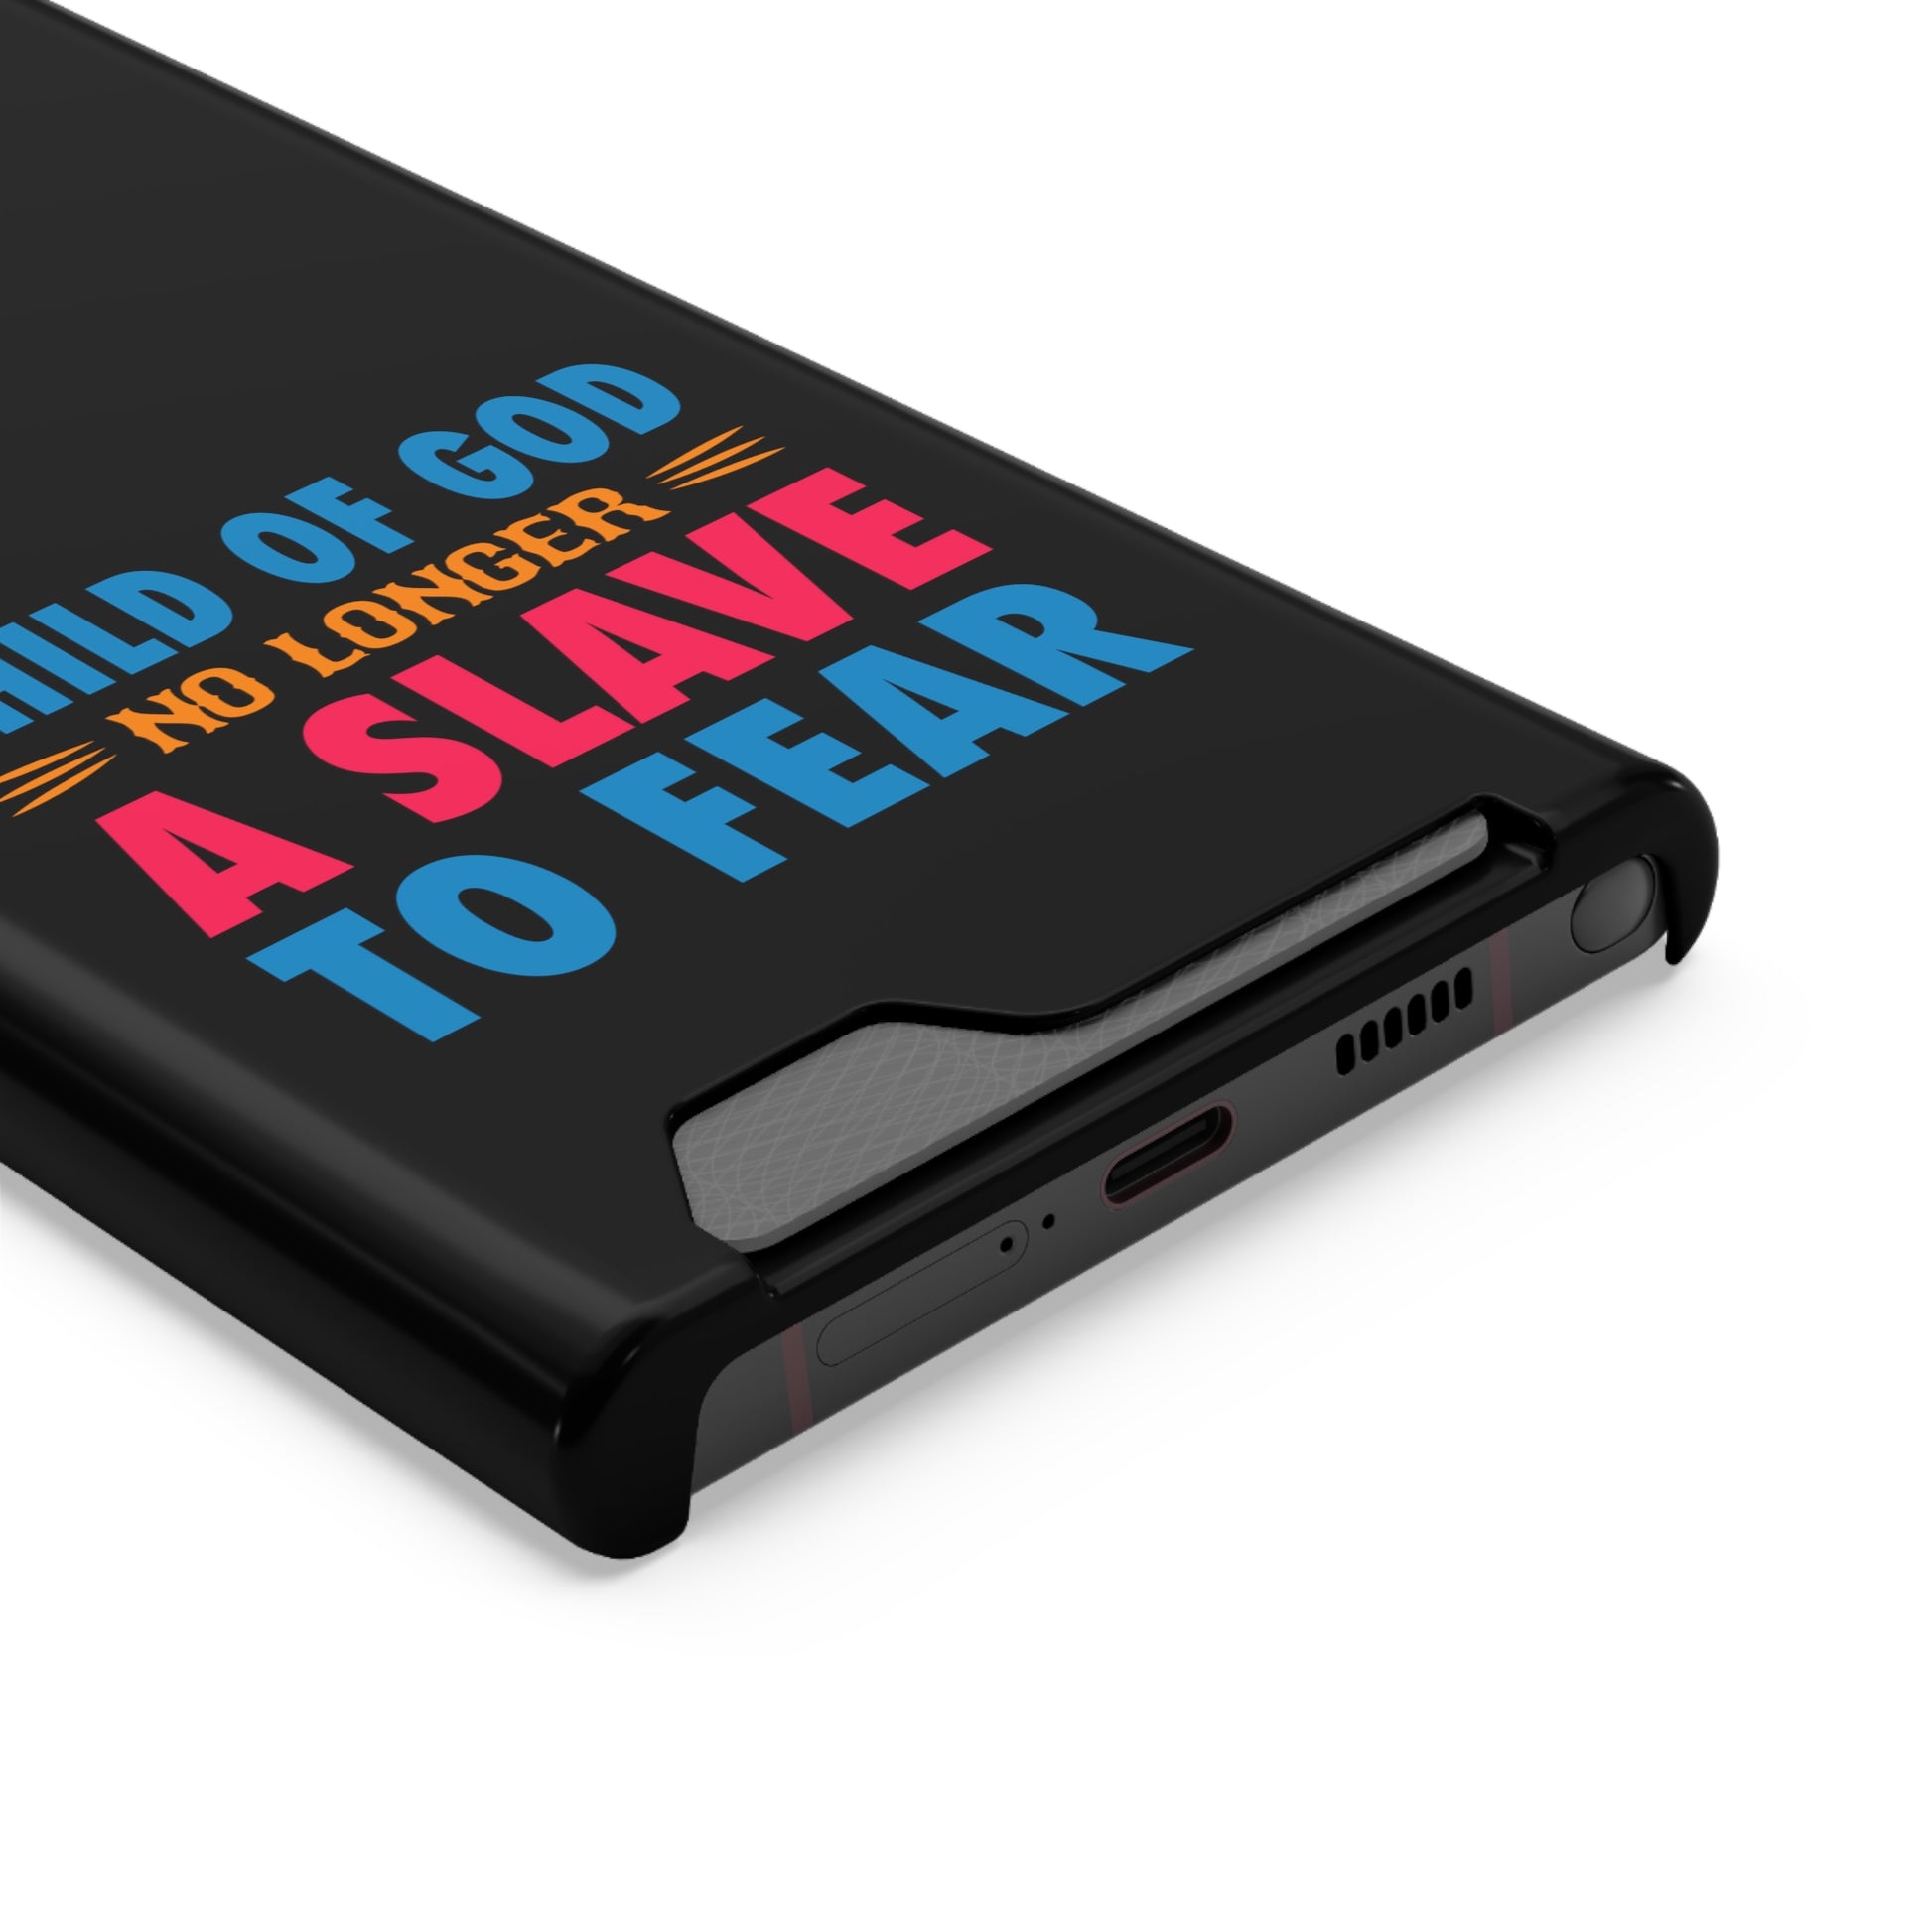 Child Of God No Longer A Slave To Fear Christian Phone Case With Card Holder Printify